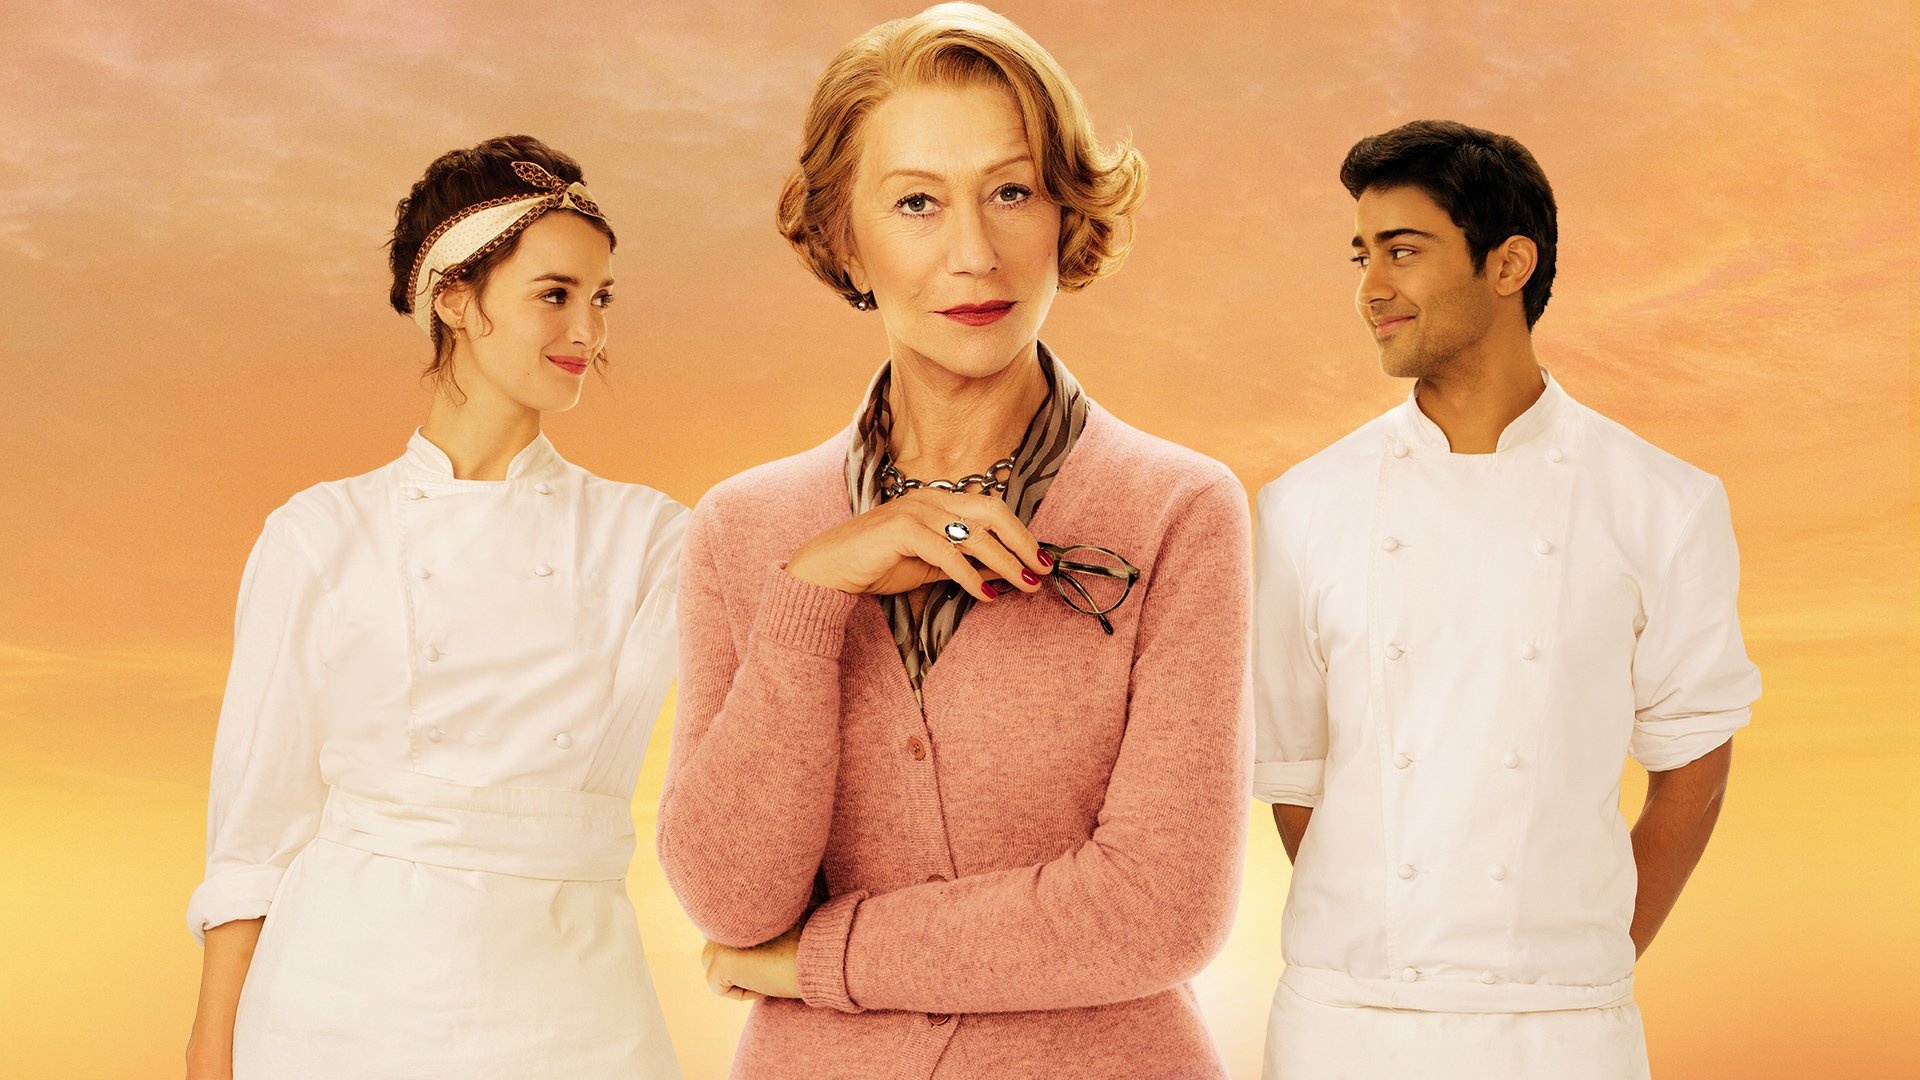 Hundred-Foot Journey, HD wallpapers, Background images, Cinematic visuals, 1920x1080 Full HD Desktop